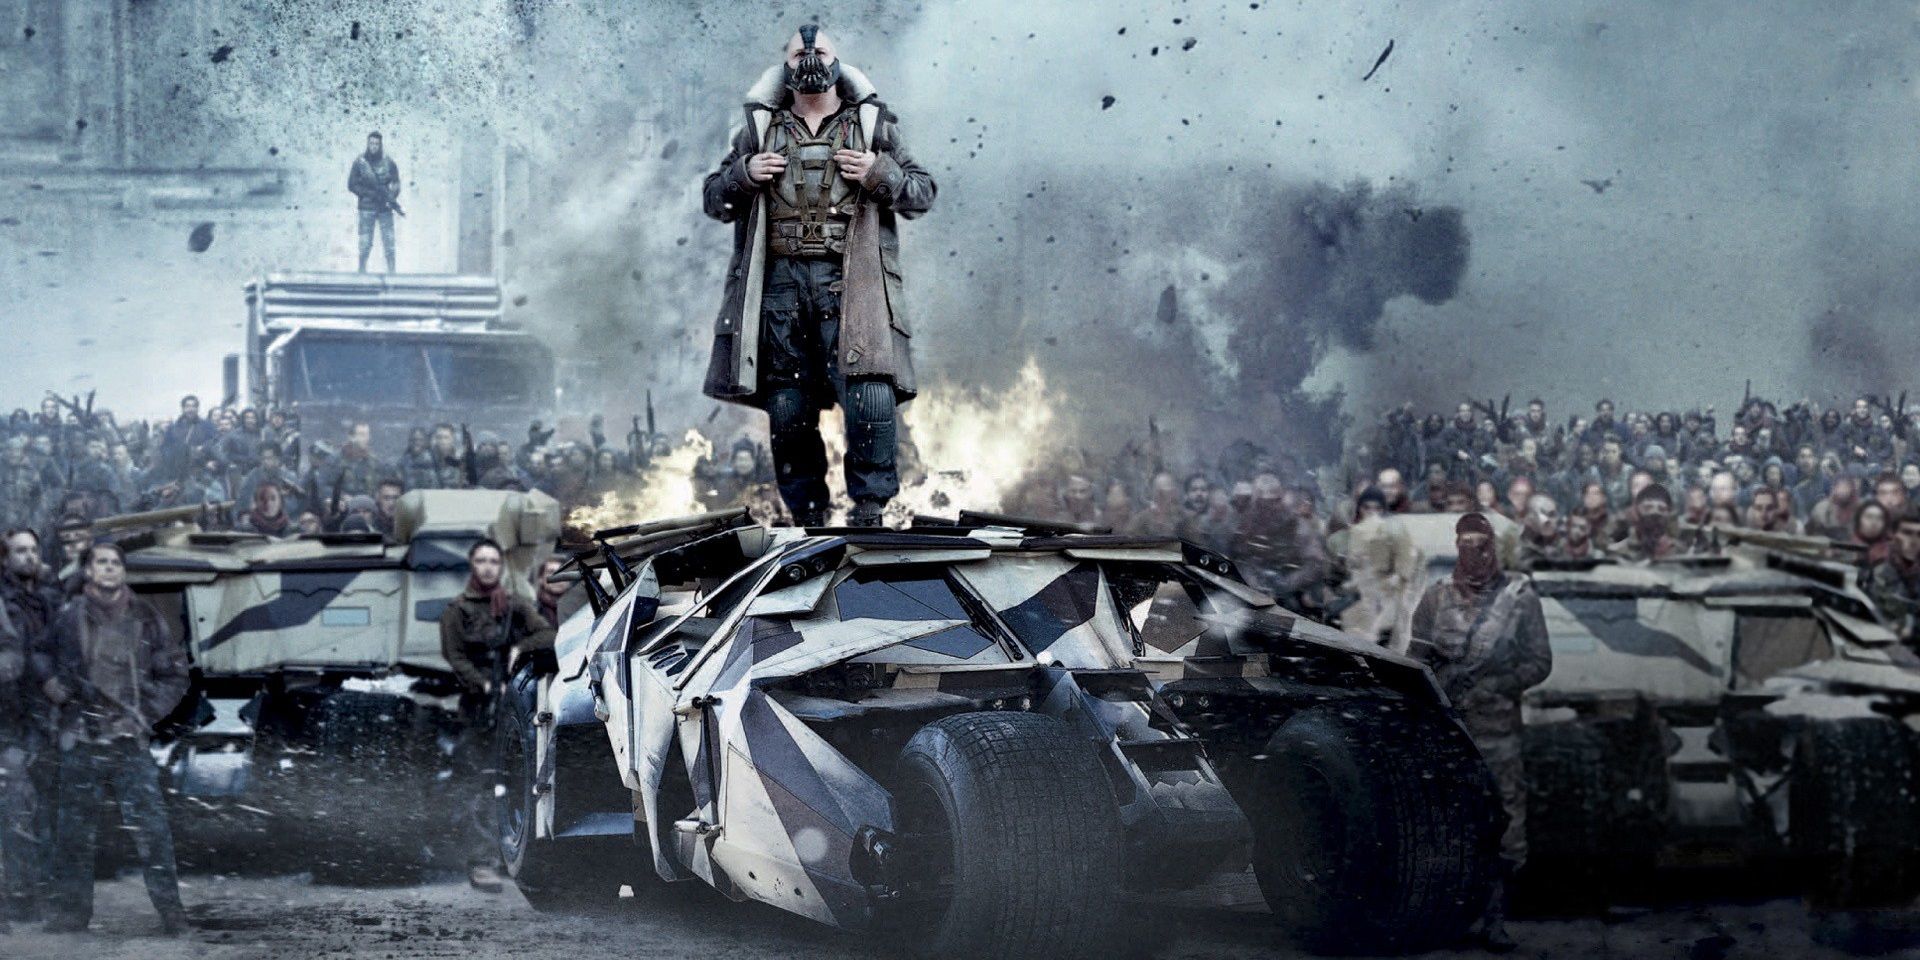 Bane and his army in The Dark Knight Rises